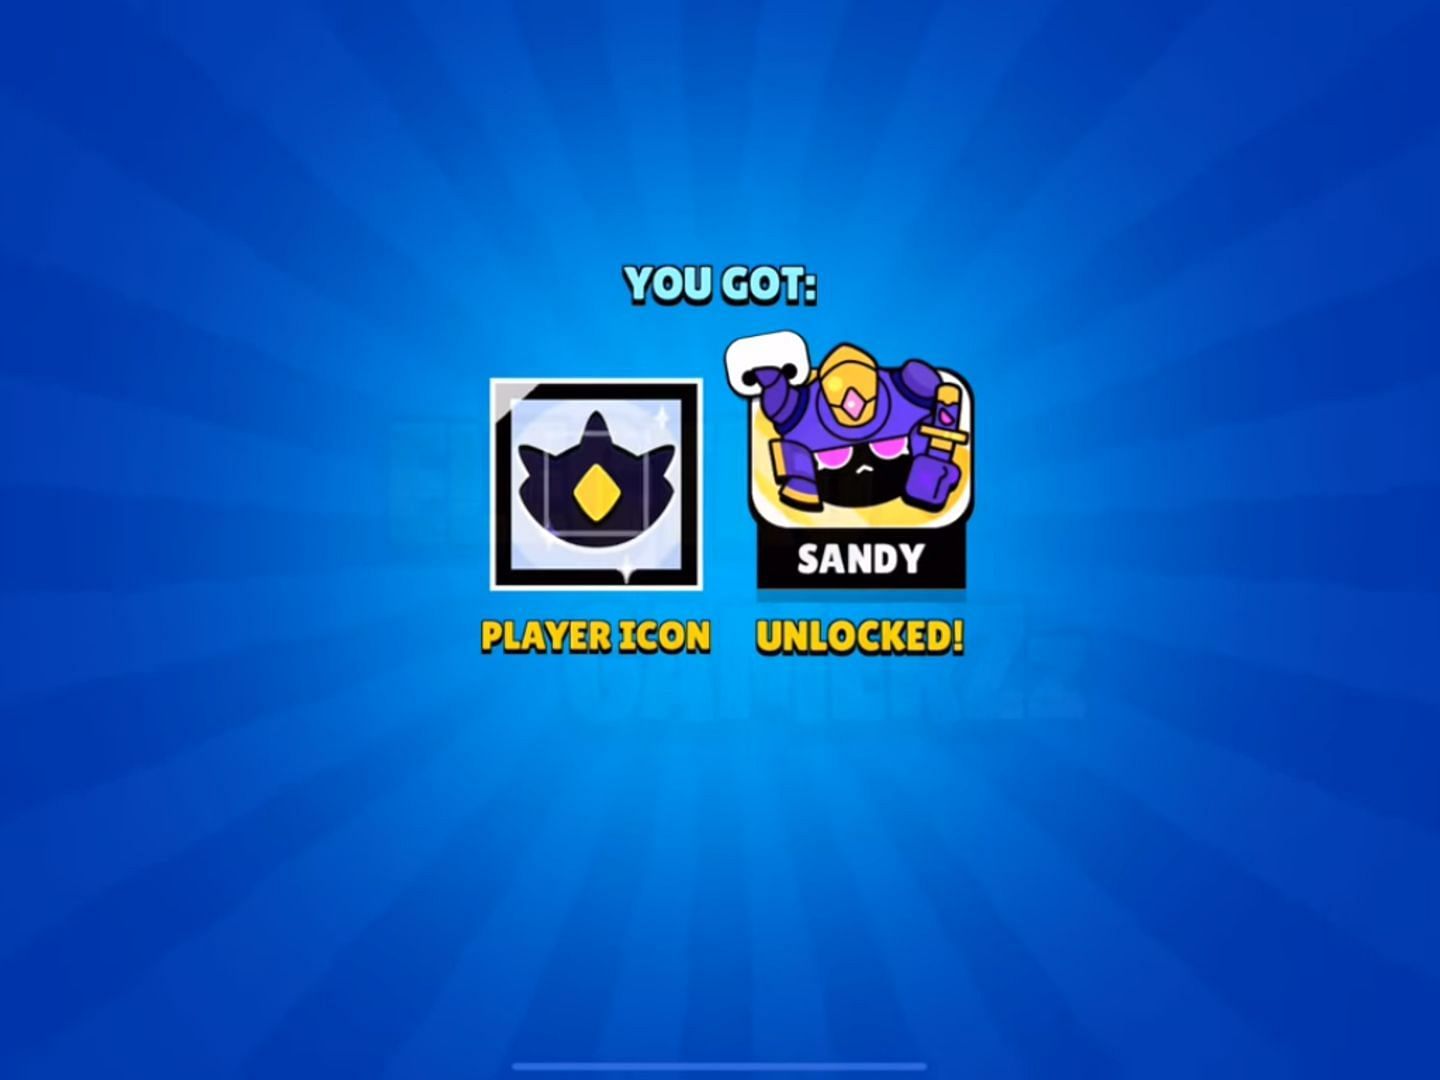 Pin and player icon received after the purchase (Image via ELECTRO GAMERZz/YouTube || Supercell)